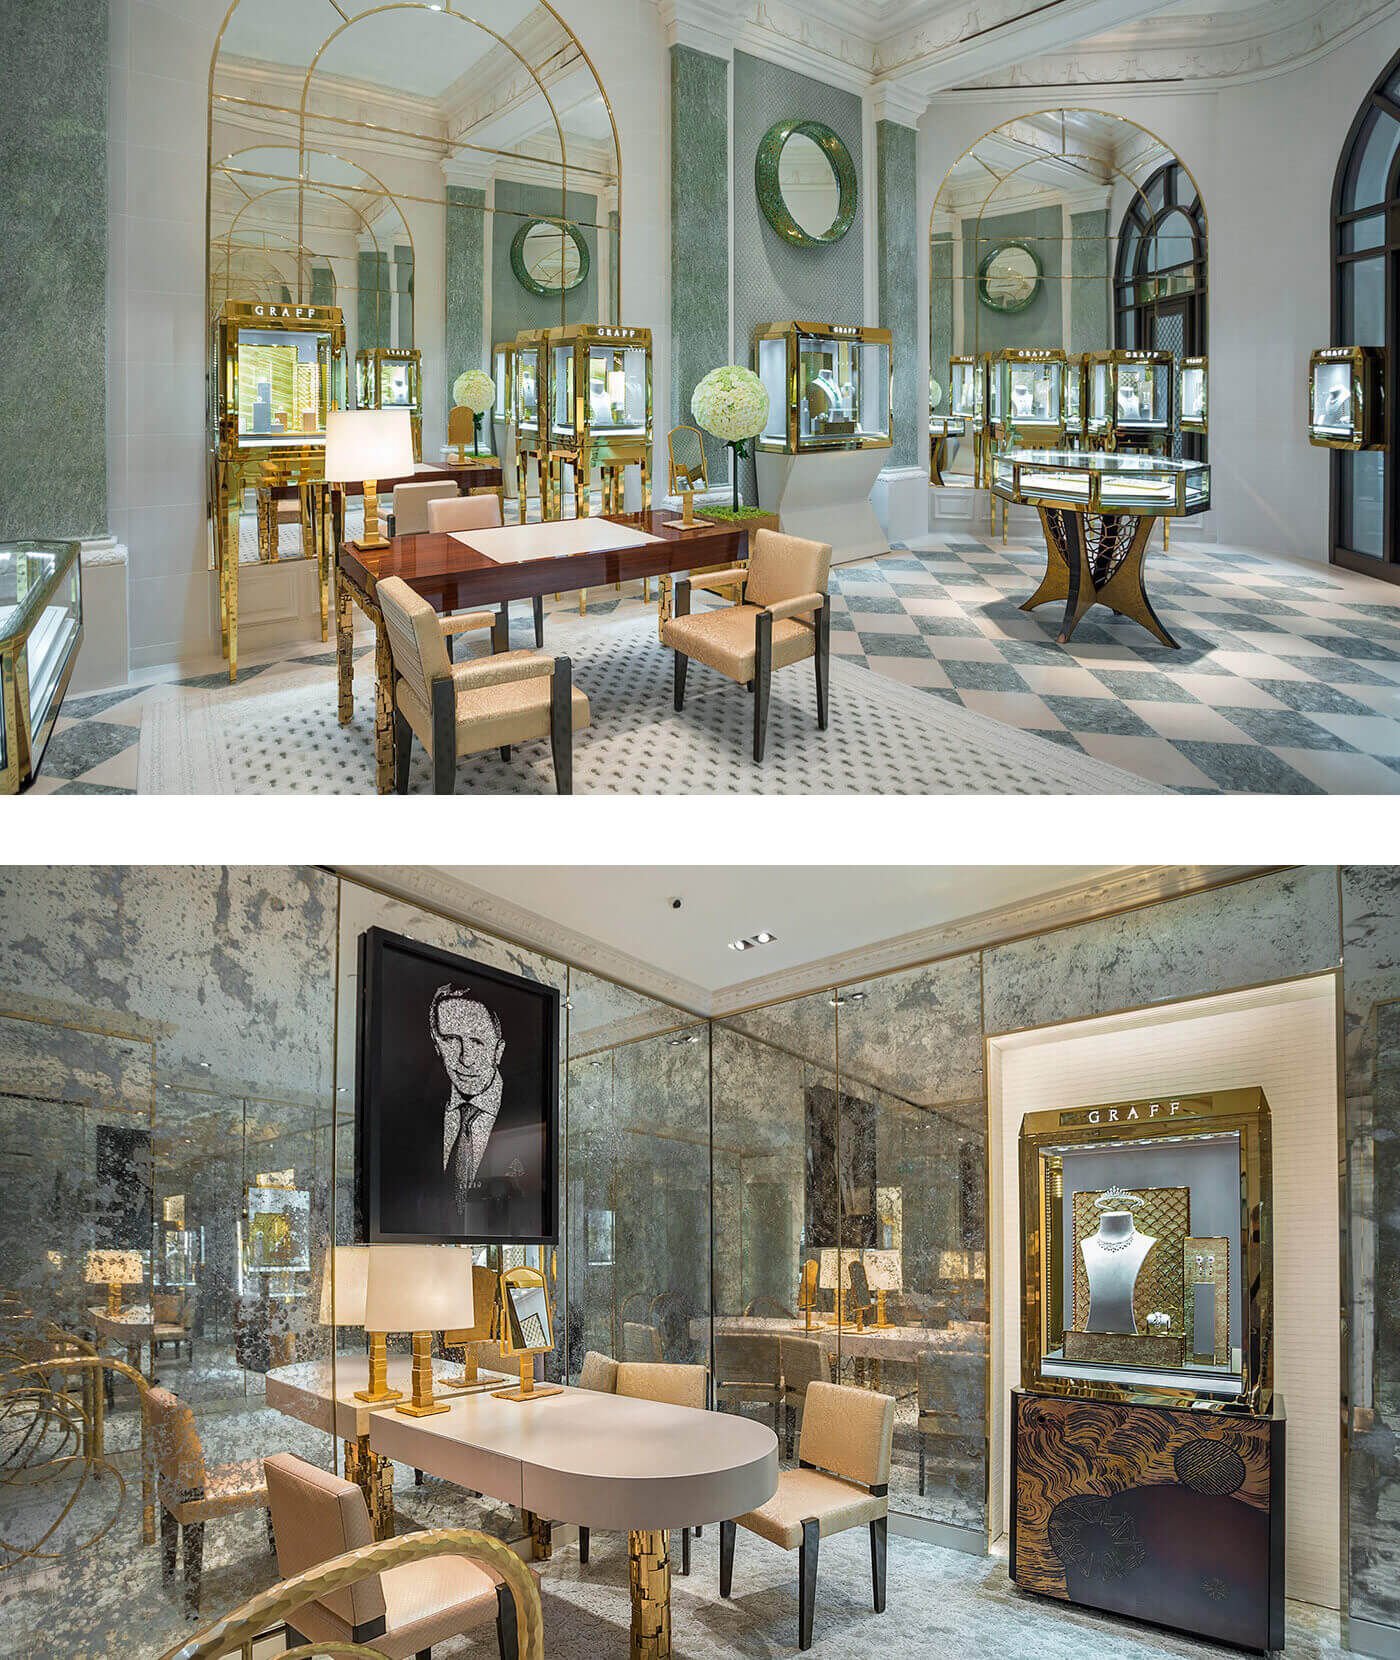 Photos of the Interior of the Graff jewellery flagship boutique in Paris, France